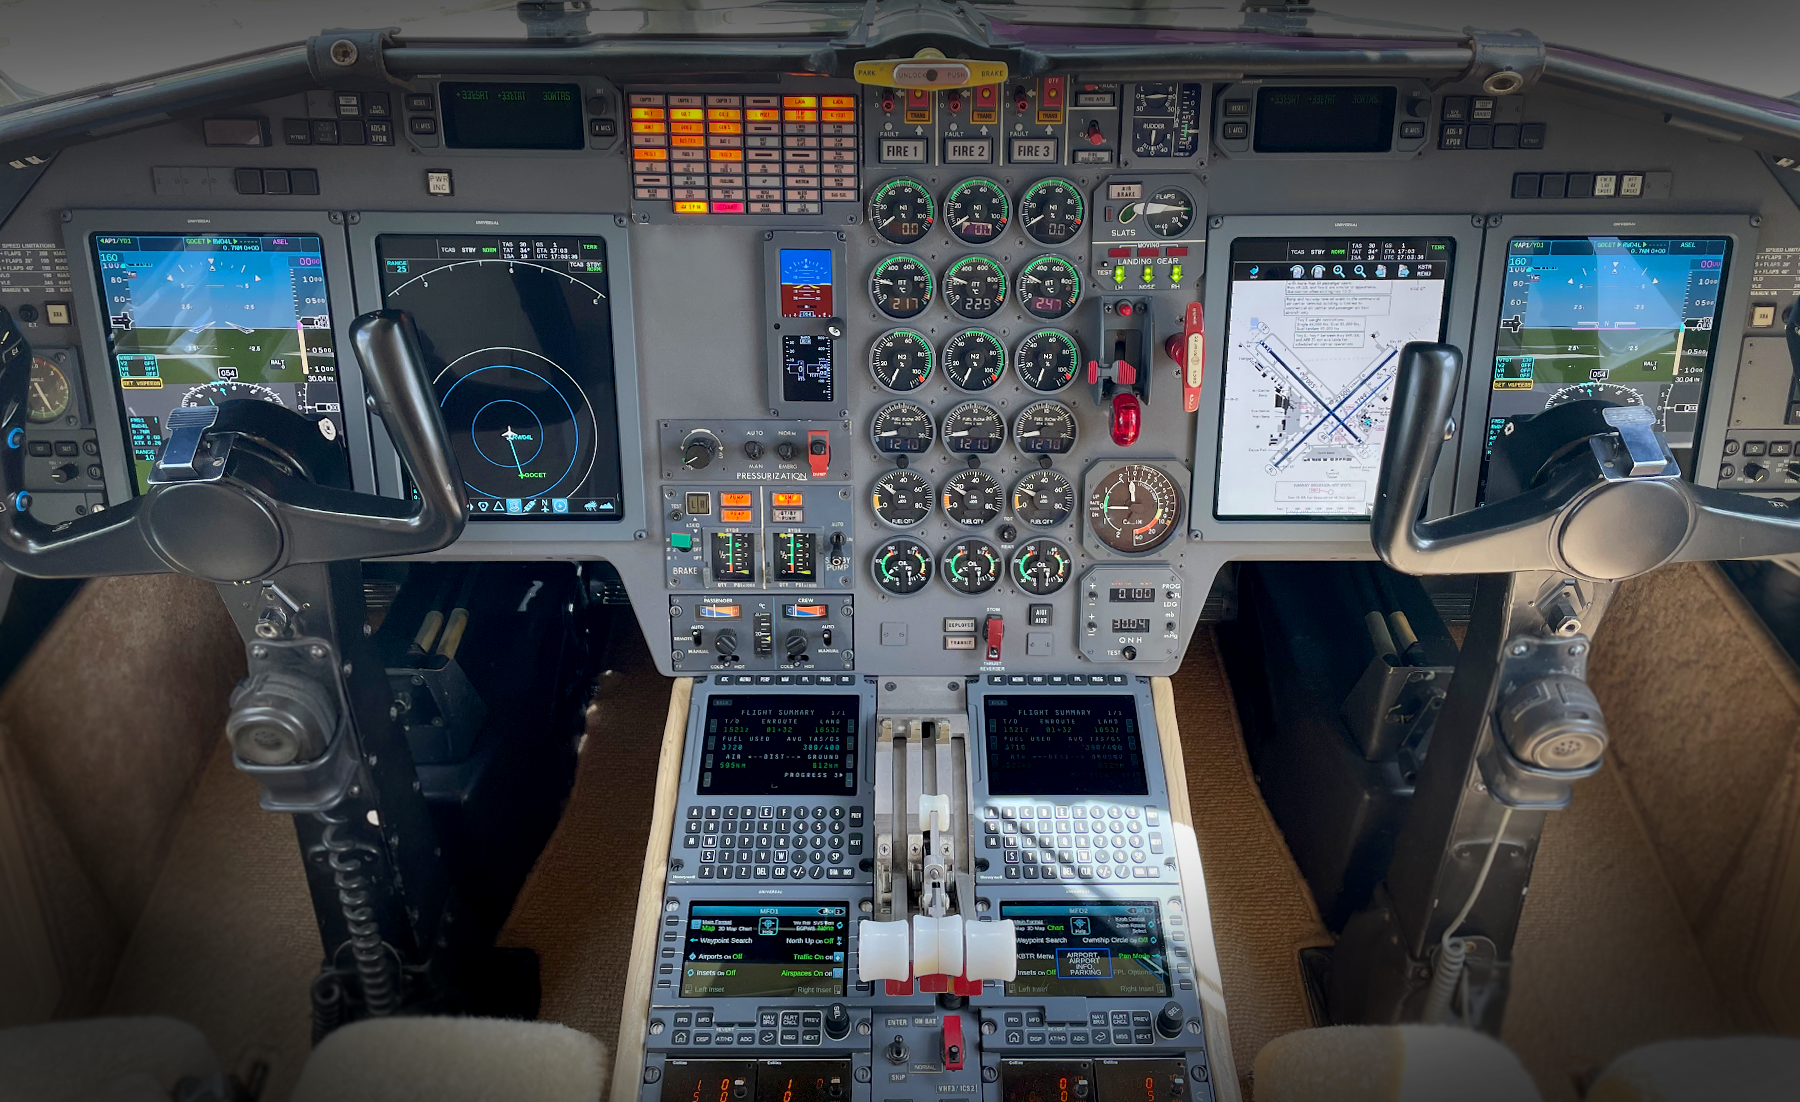 Dassault Falcon 900B with InSight Display System